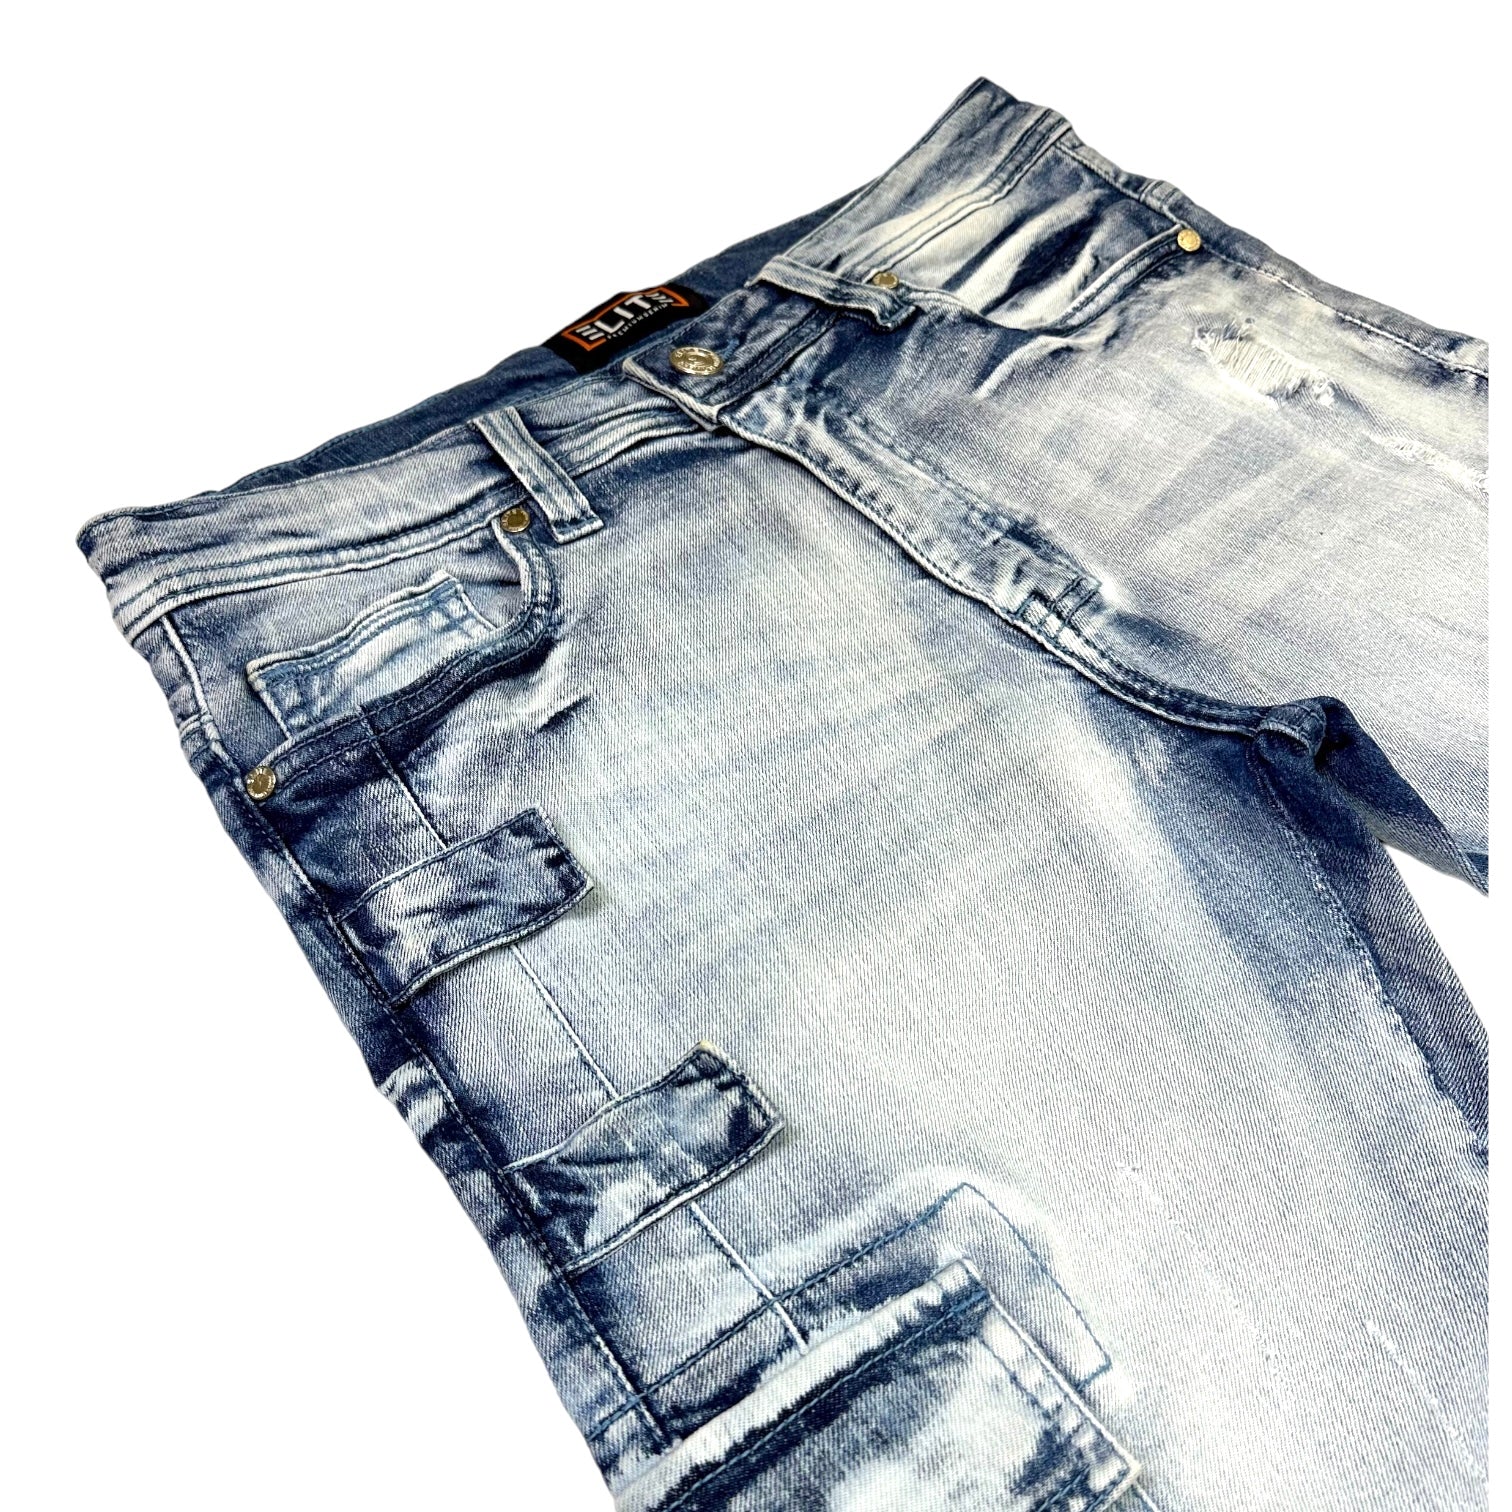 MMNF Premium Men's Stacked Jeans